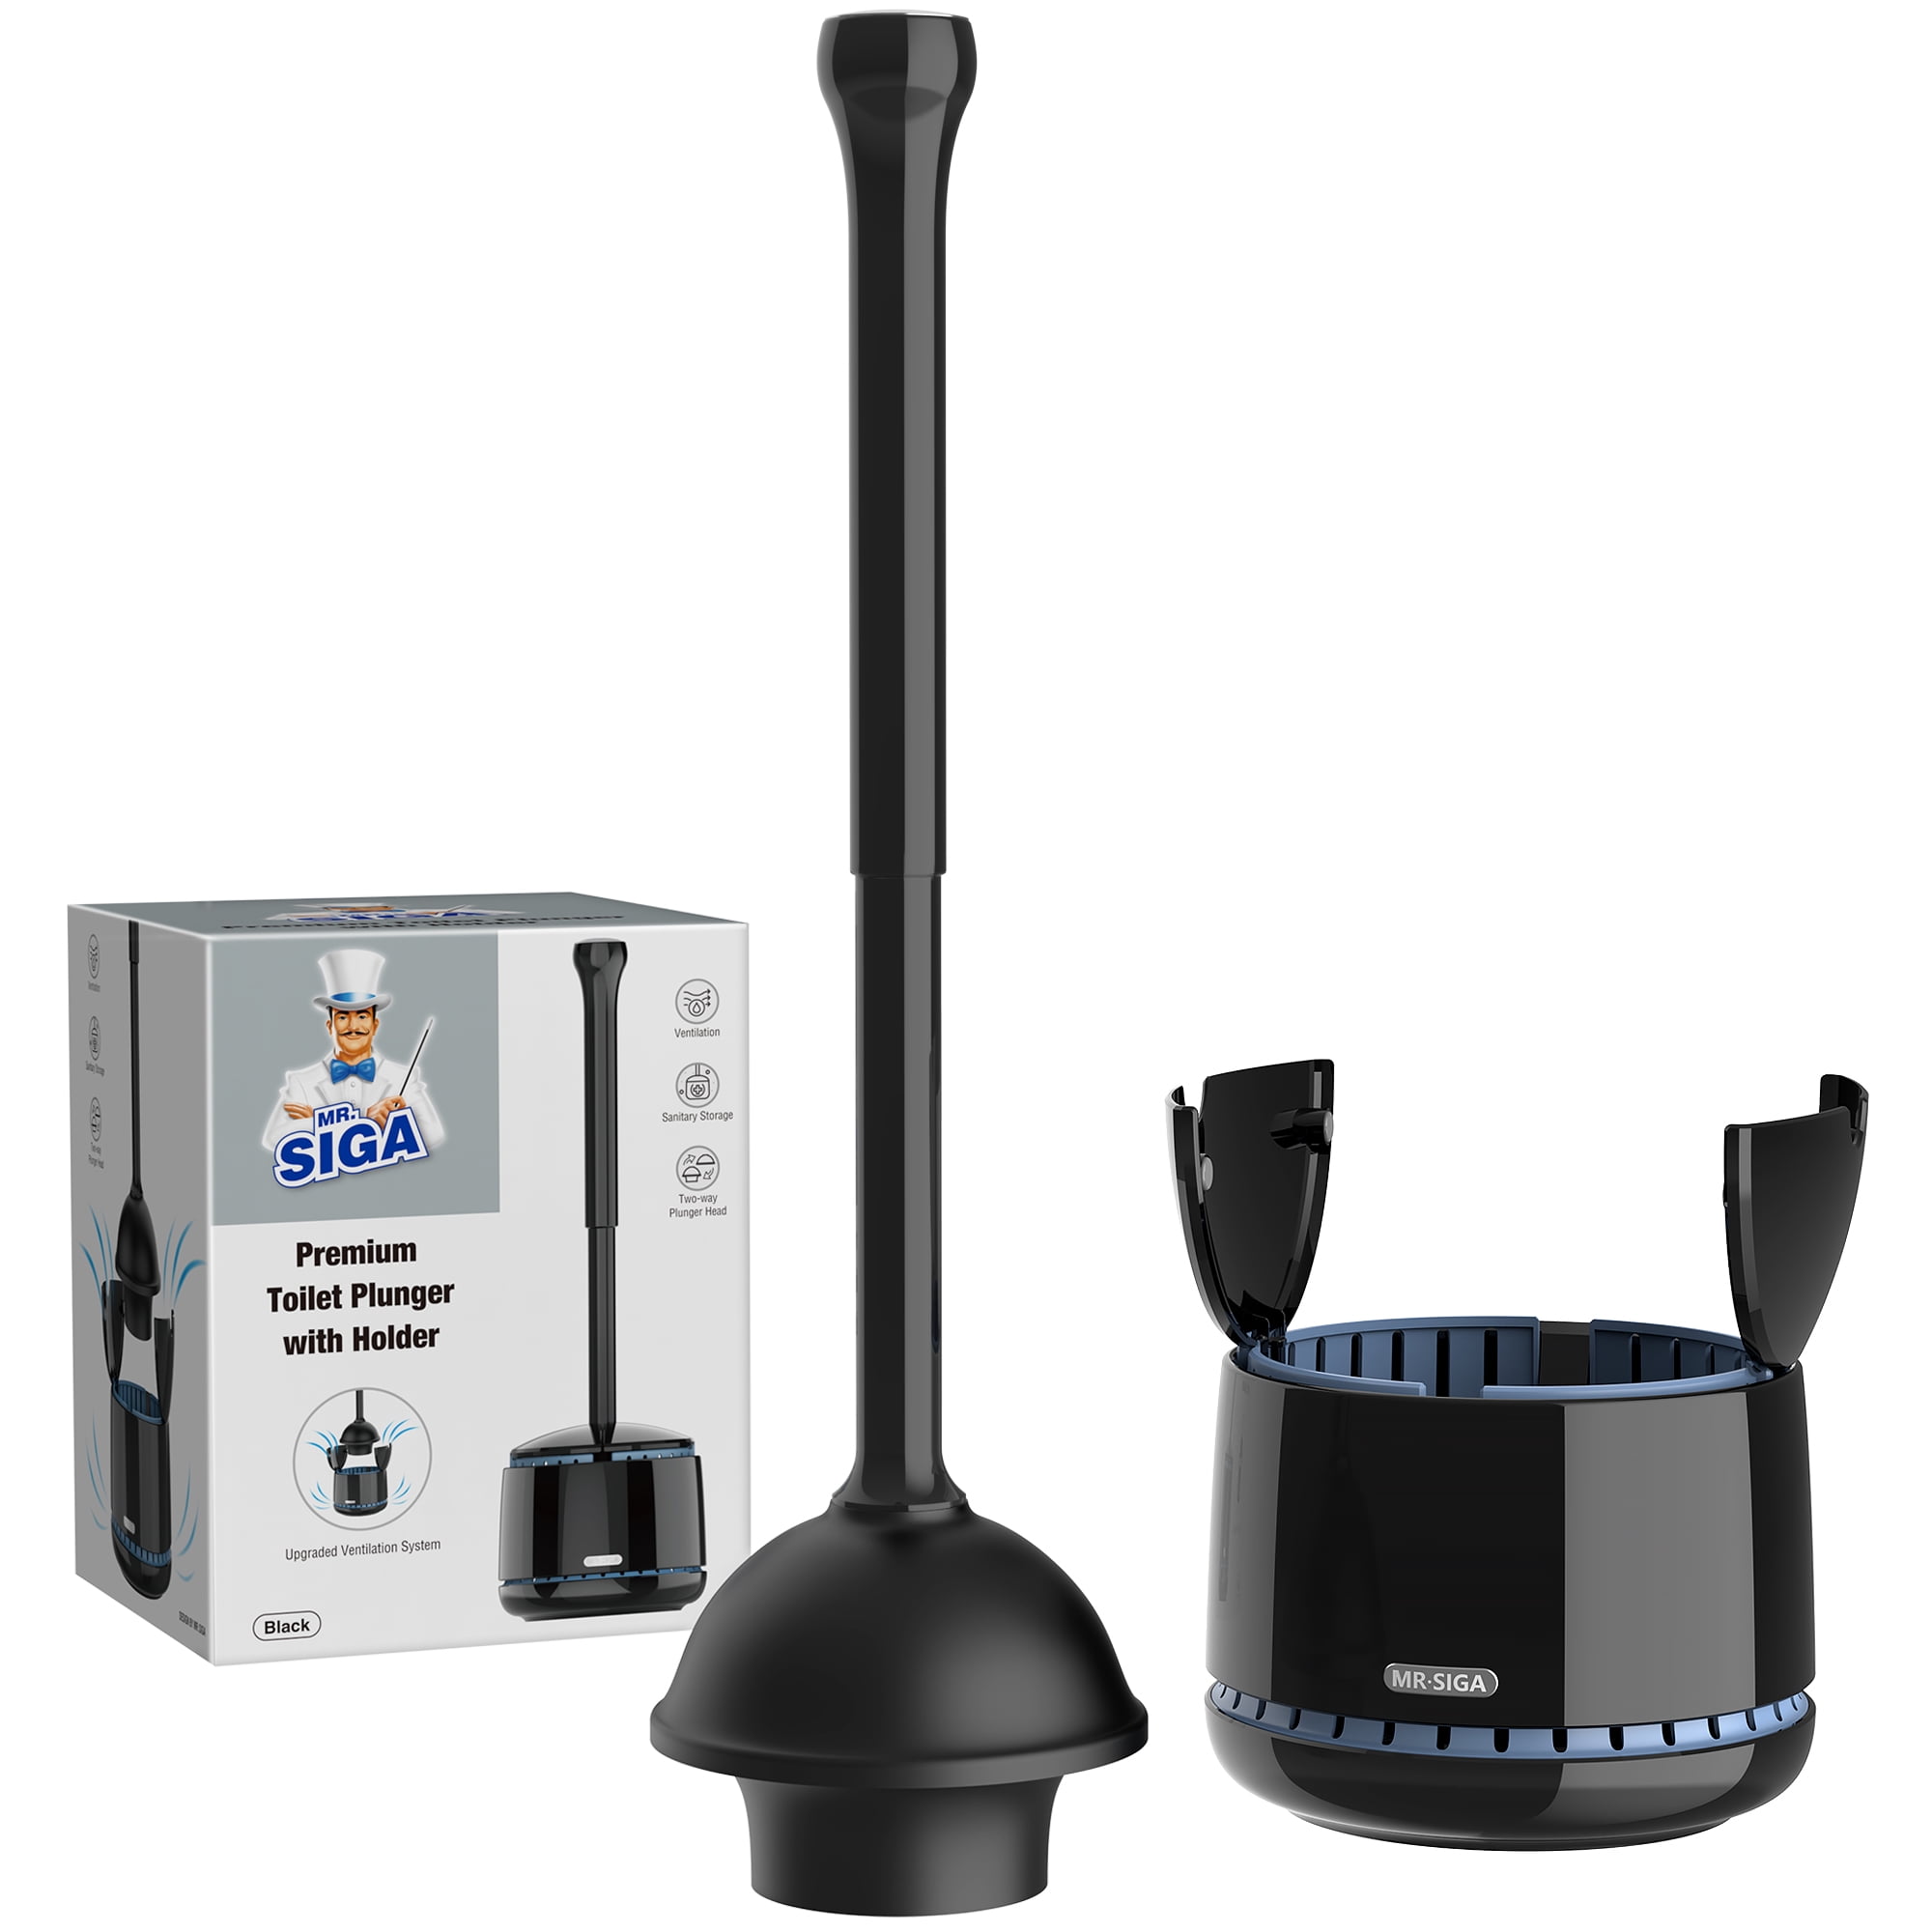 MR.Siga Toilet Plunger with Holder, Heavy Duty Plunger with Sturdy